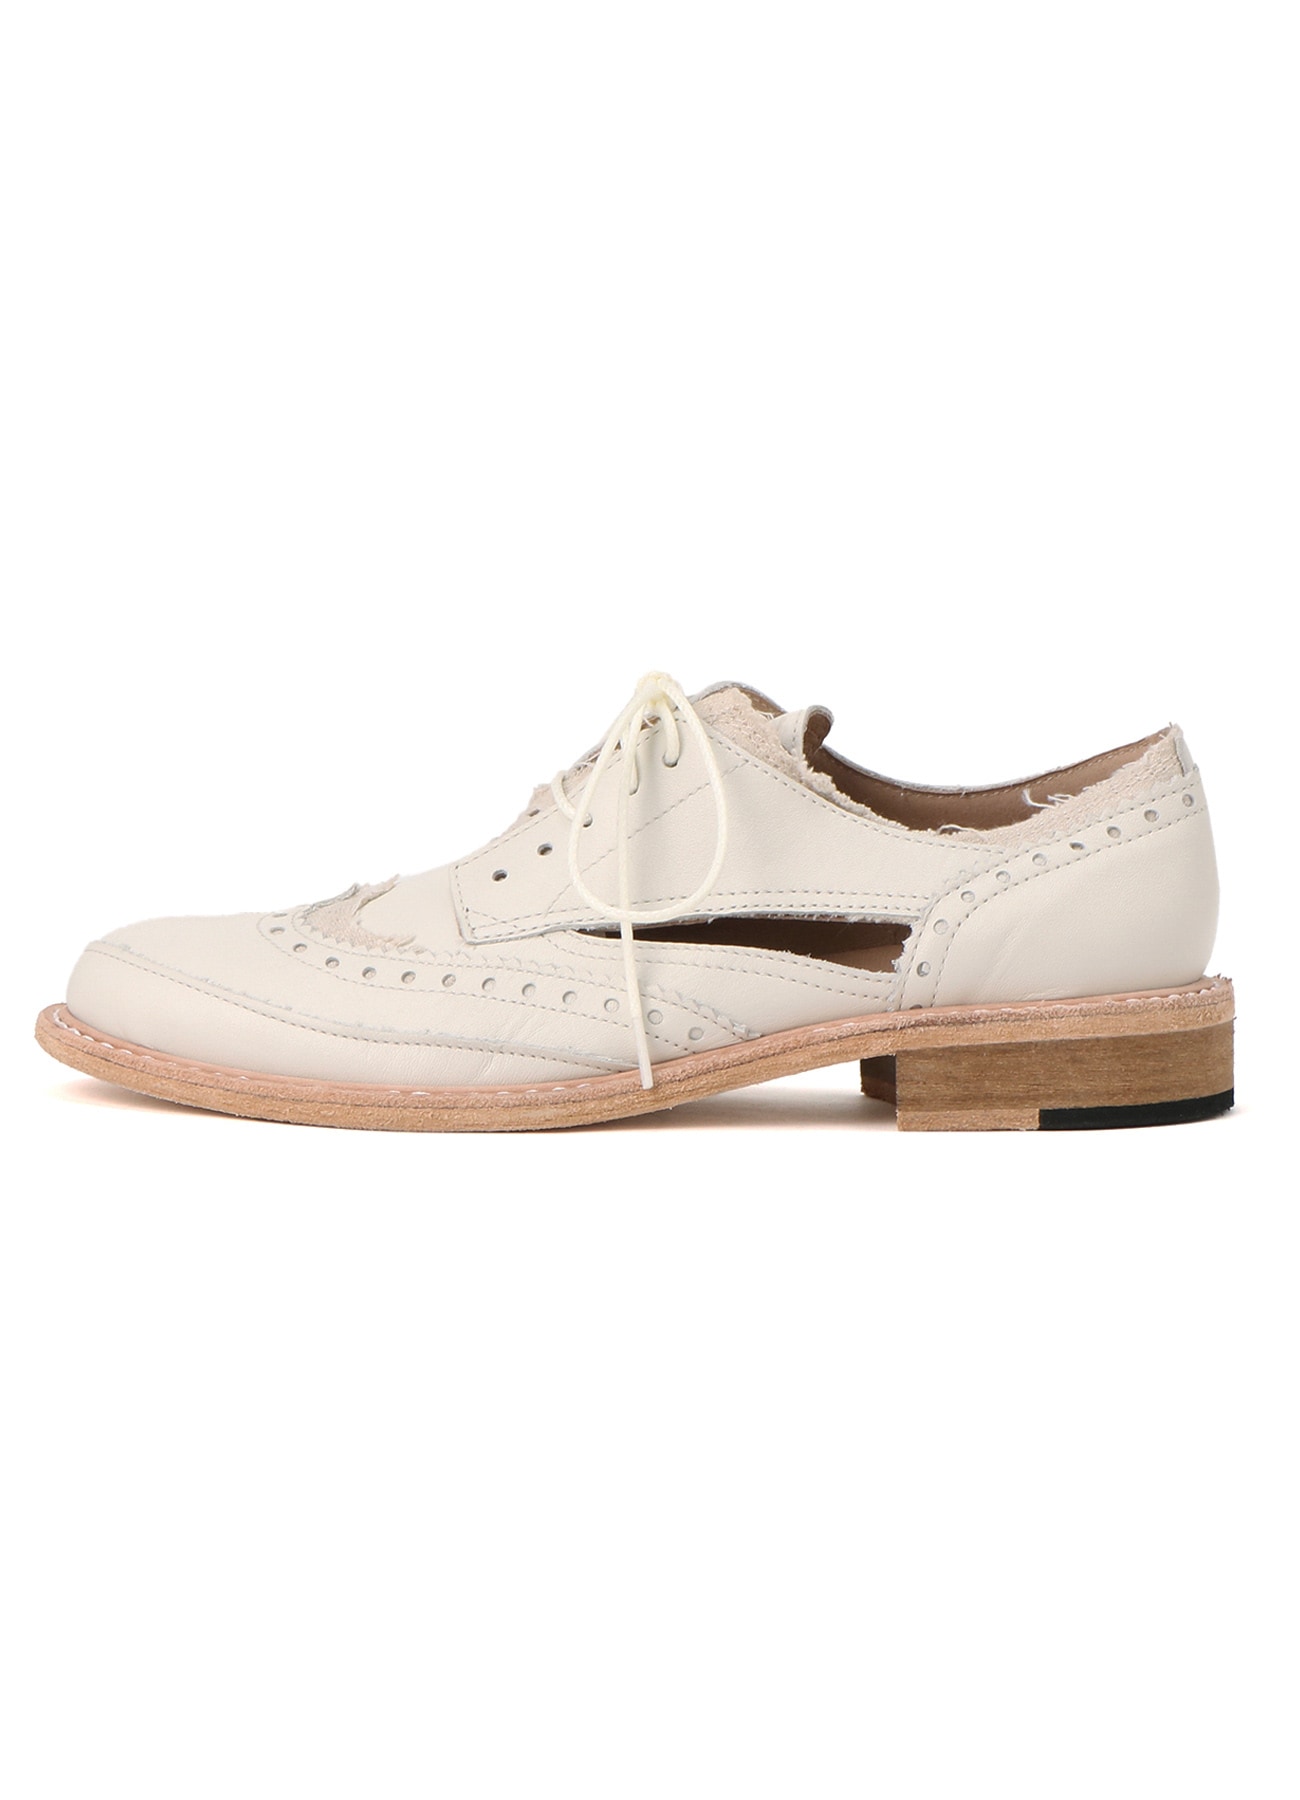 COTTON LINEN/LEATHER COMBINATION WING CHIP SHOES(US 5.5 Off White 